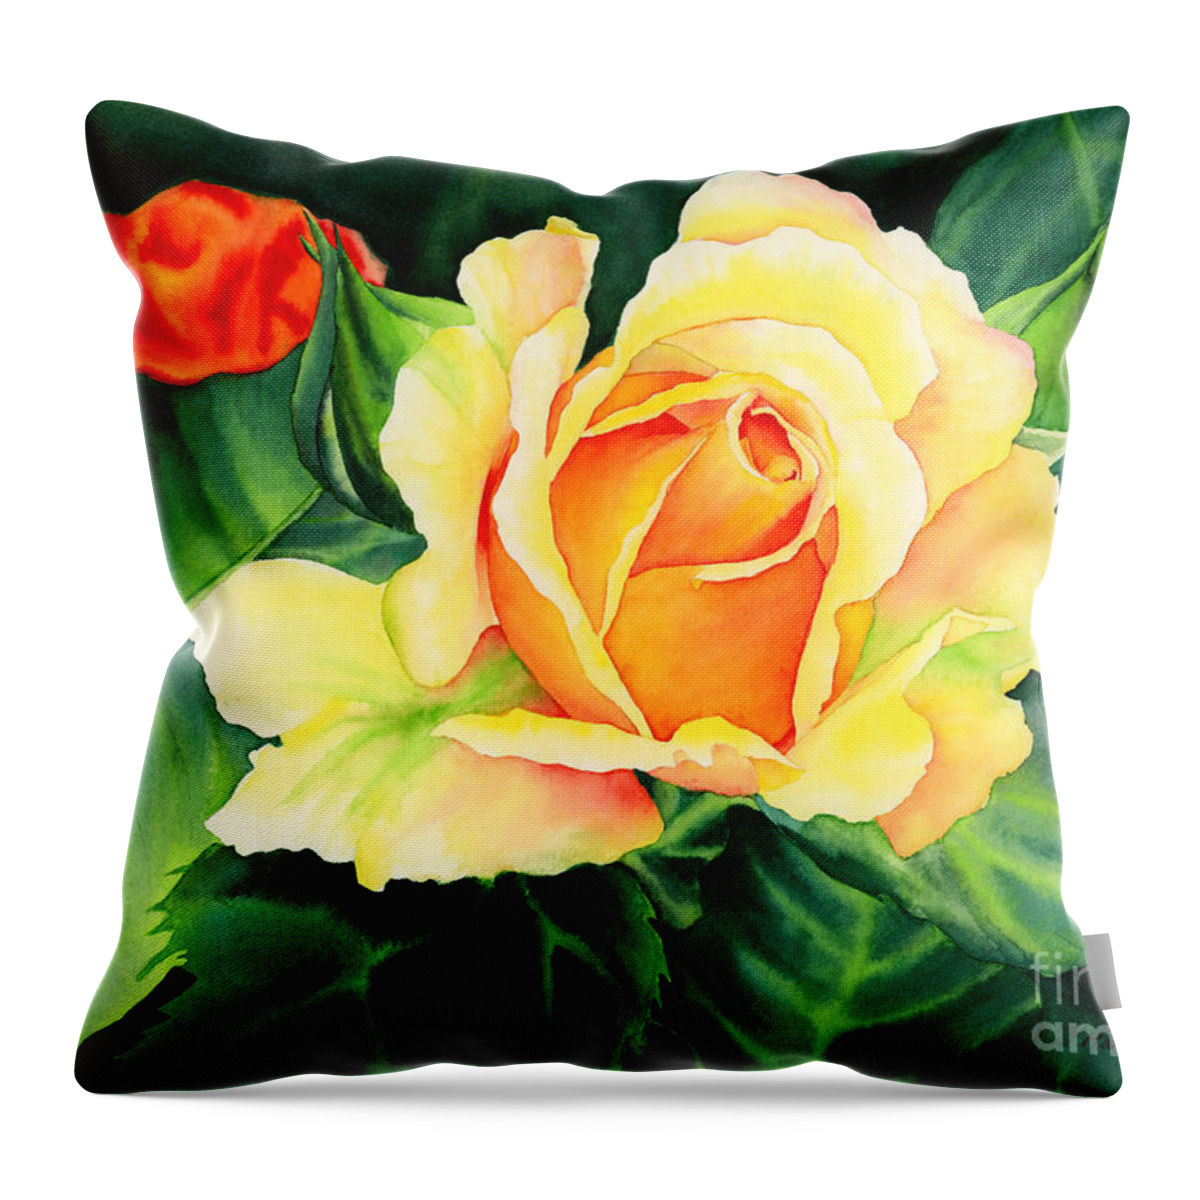 Watercolor Throw Pillow featuring the painting Yellow Roses by Hailey E Herrera